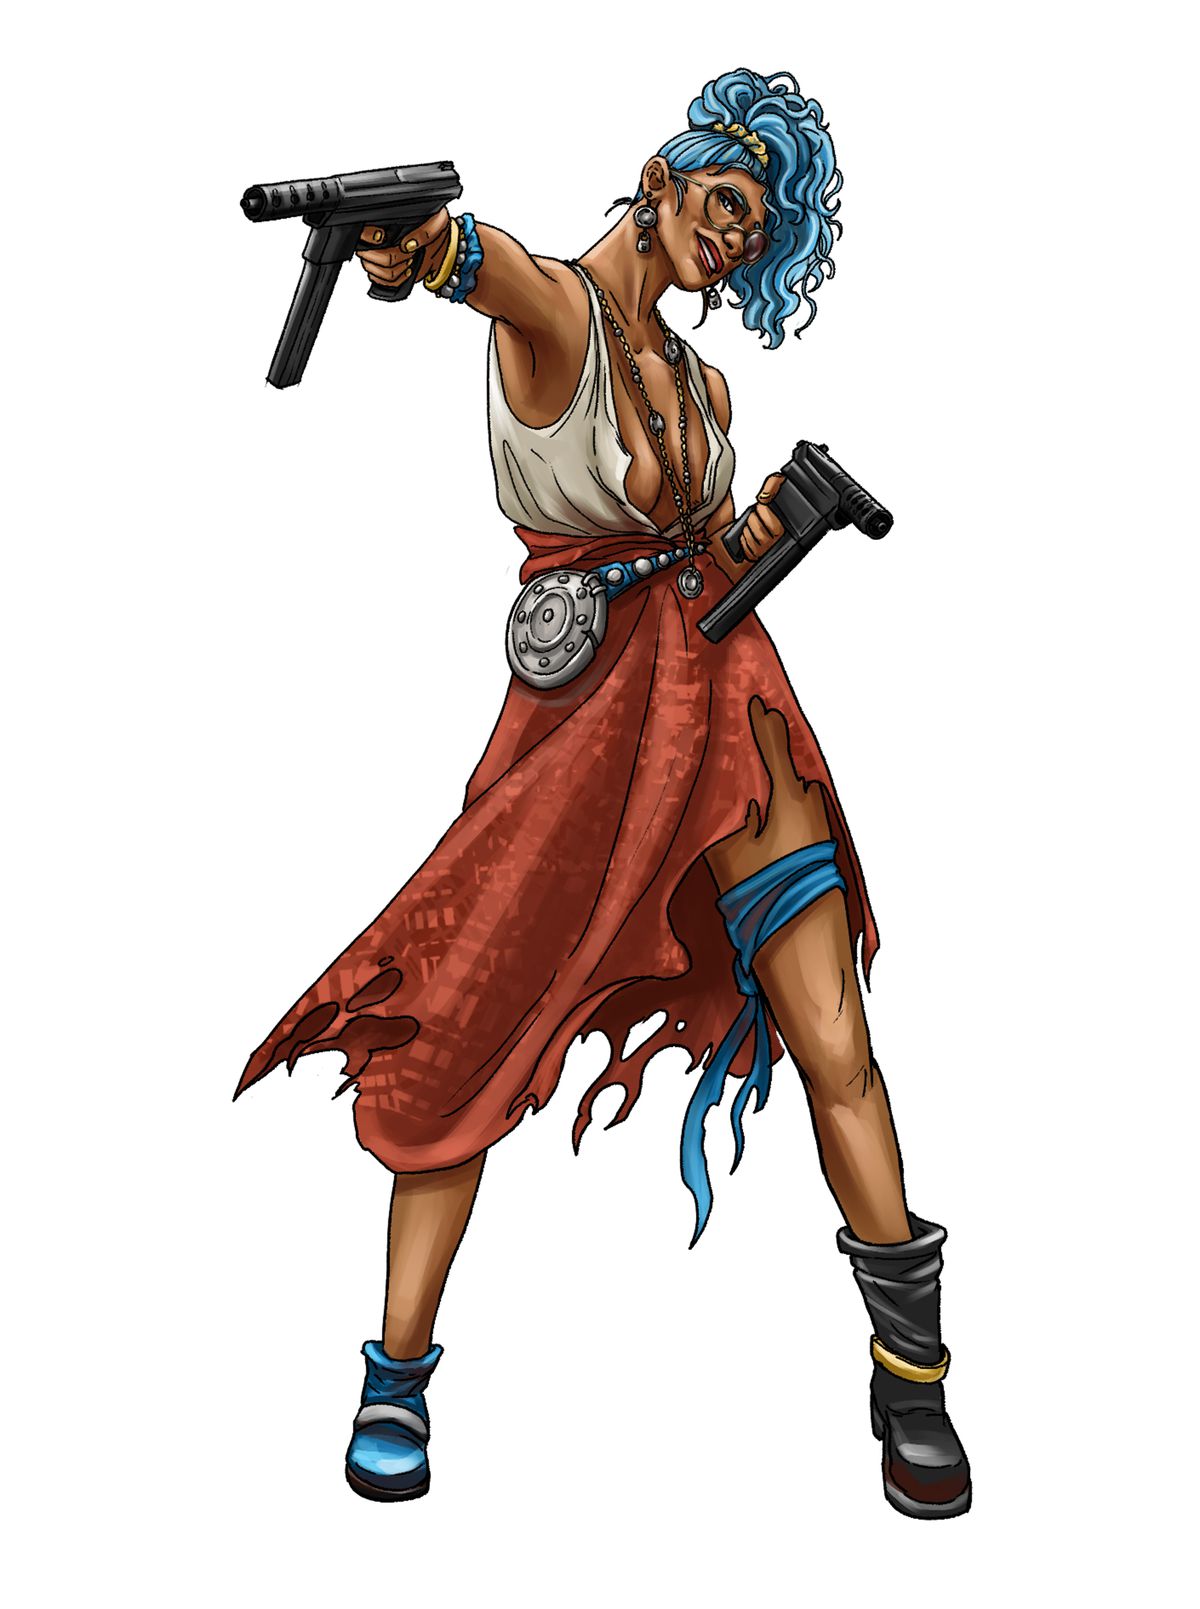 A flashy woman with blue hair and mismatched clothes comes out with an automatic gun.